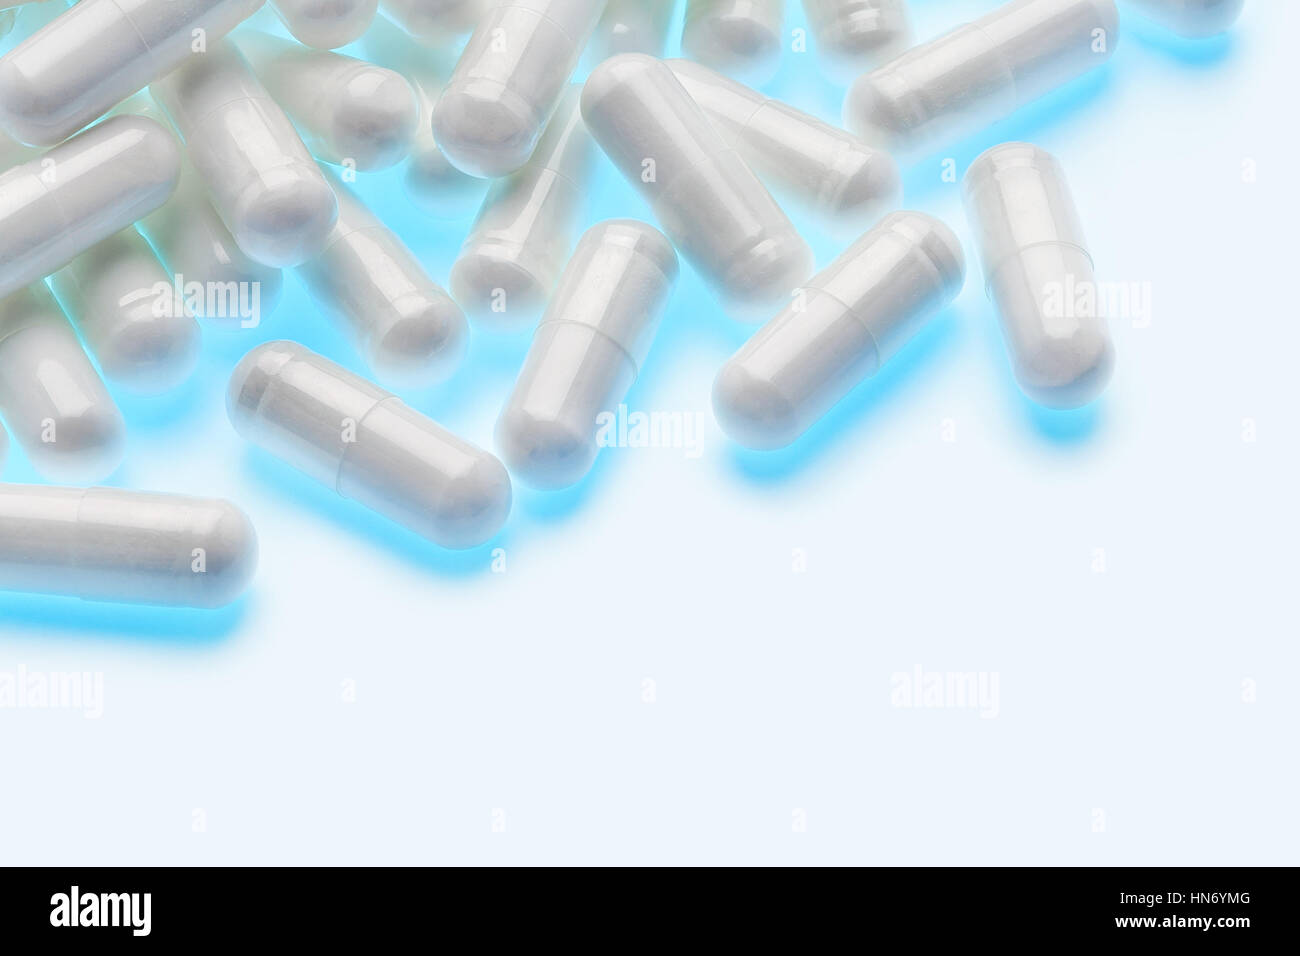 Heap of glowing capsules on white background. Copy space. High resolution product. Health care concept Stock Photo